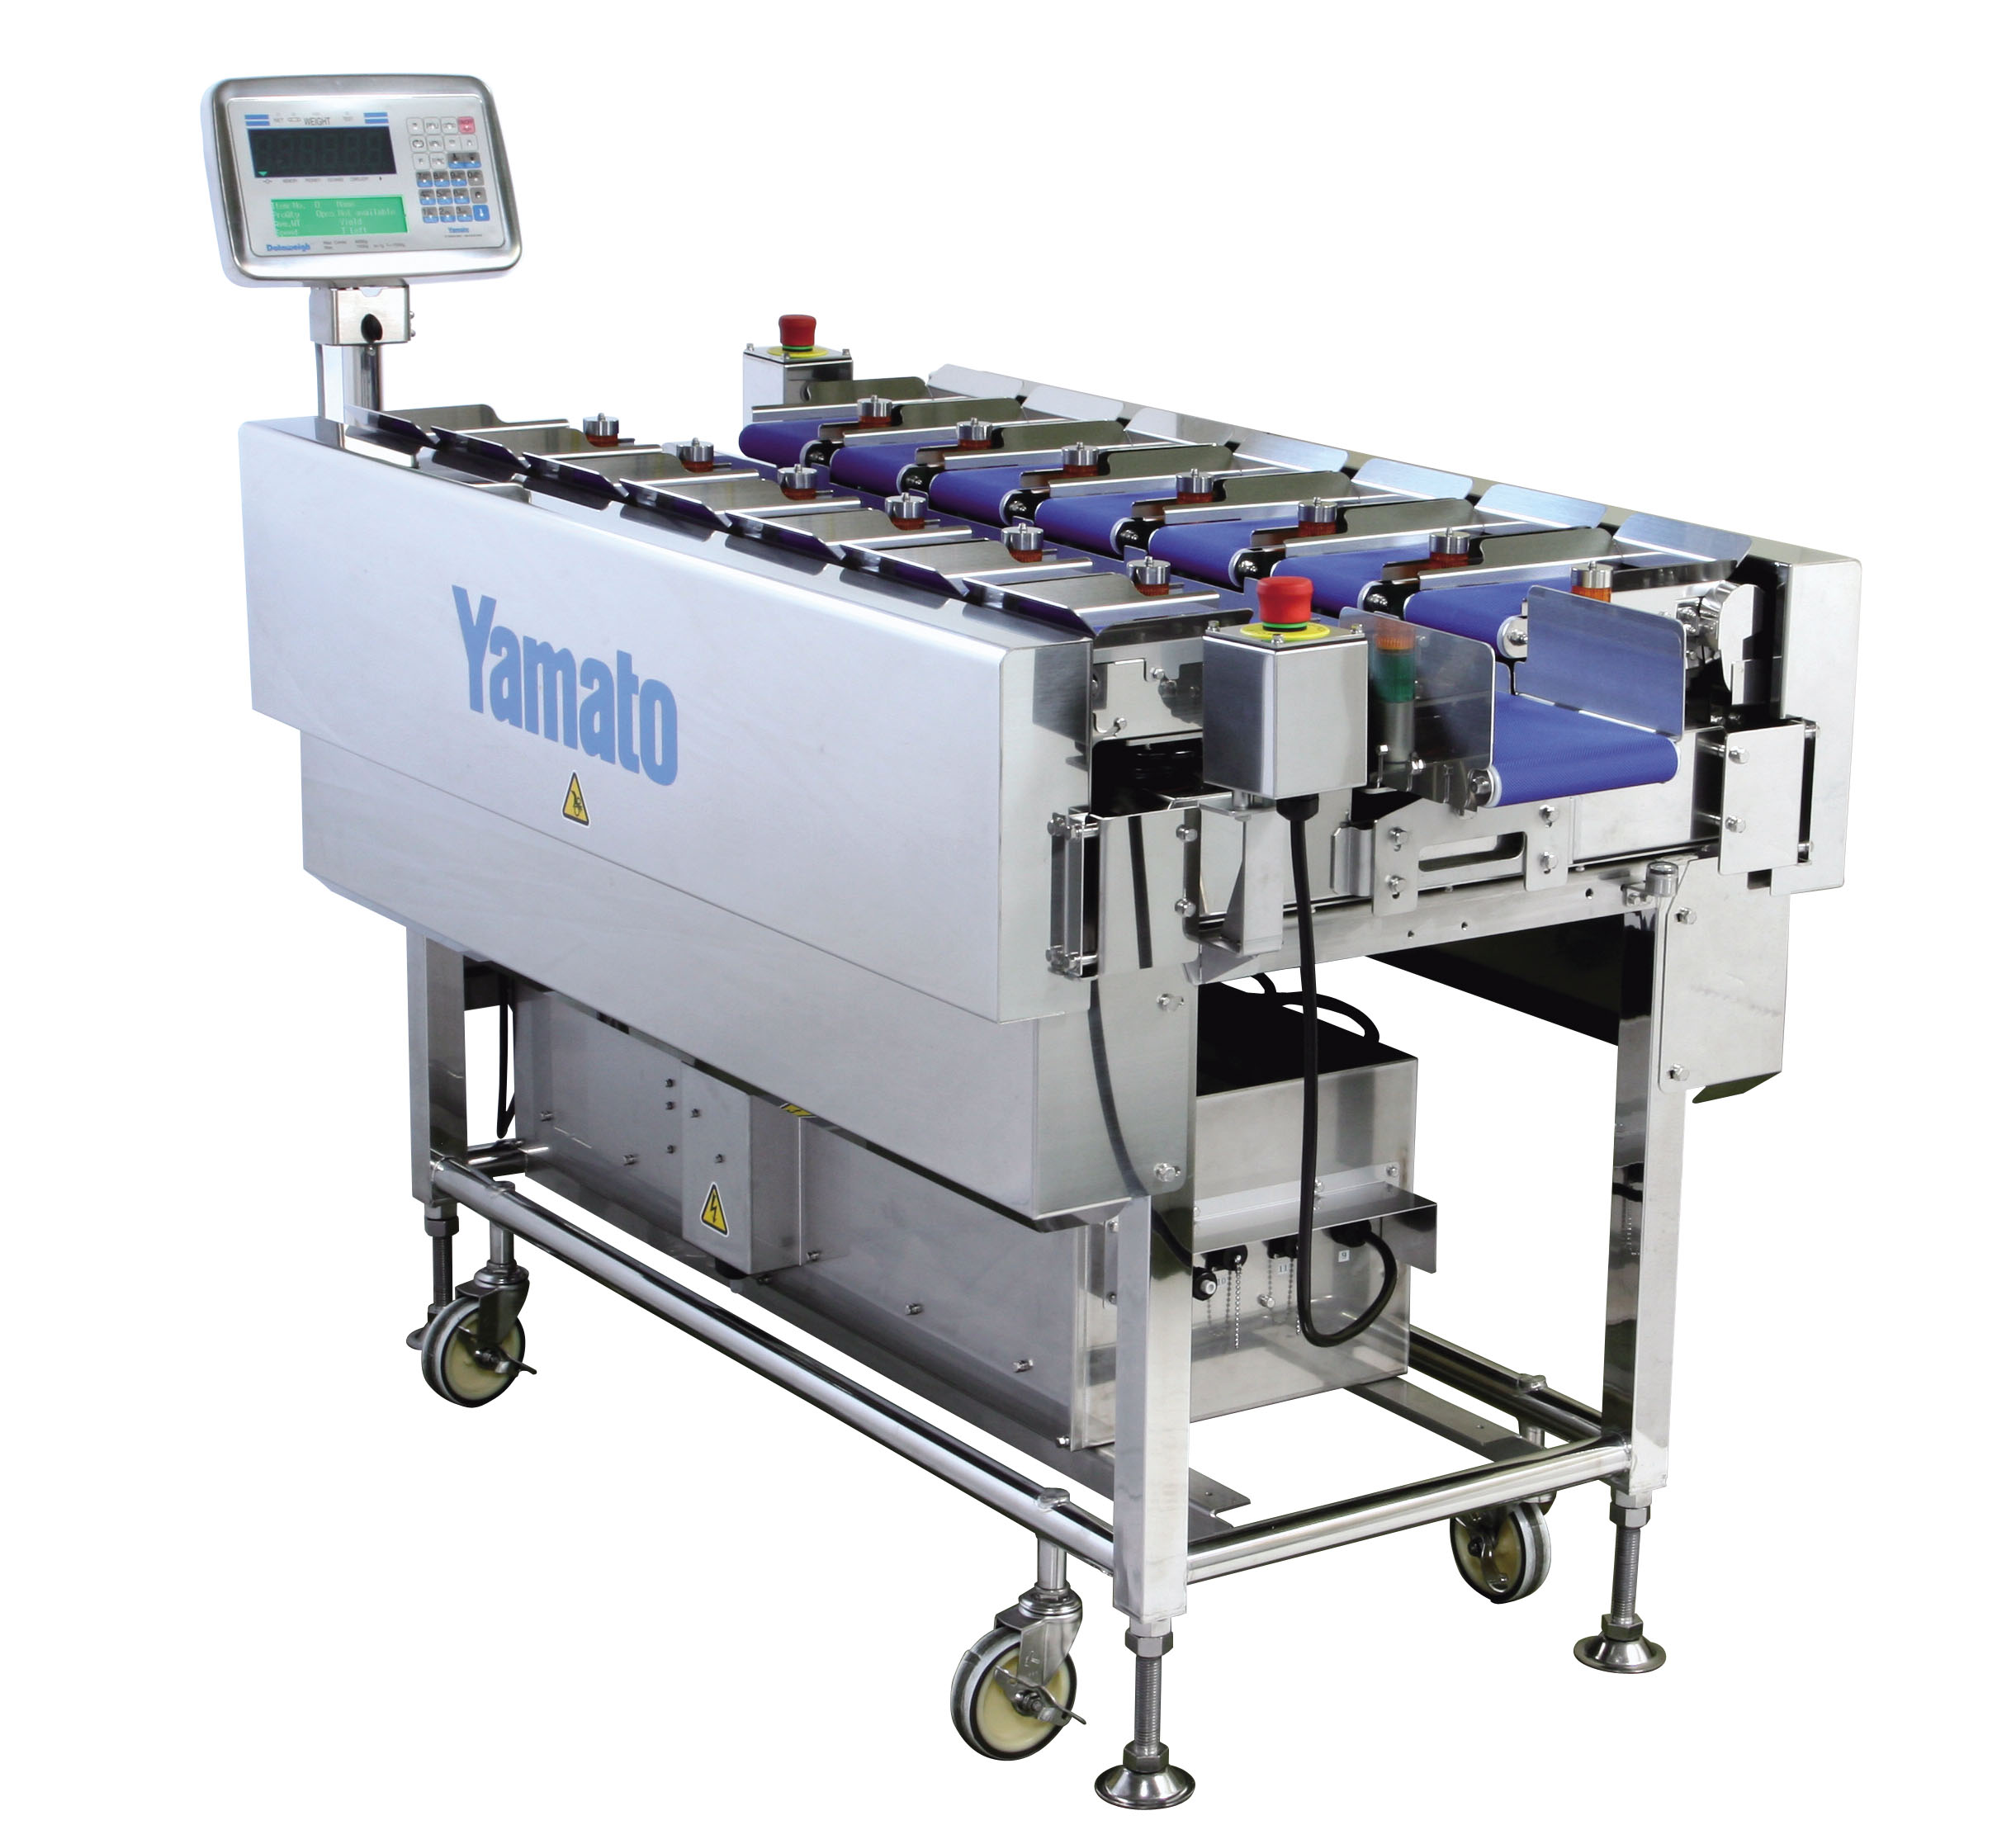 Yamato’s TSDW Multihead Weigher for Fragile Products